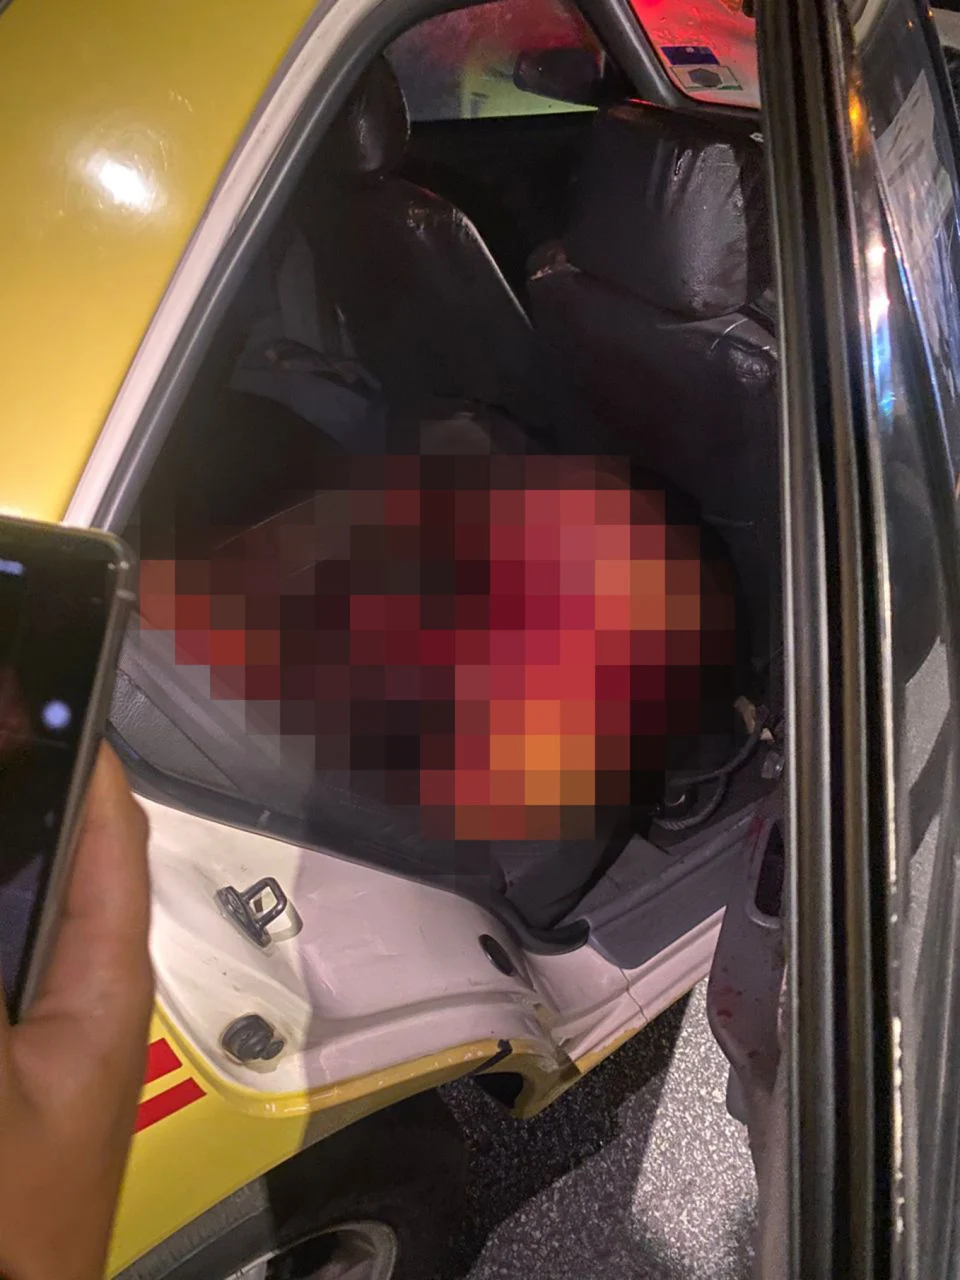 29yo m'sian man murders taxi driver, confesses to act after getting into an accident